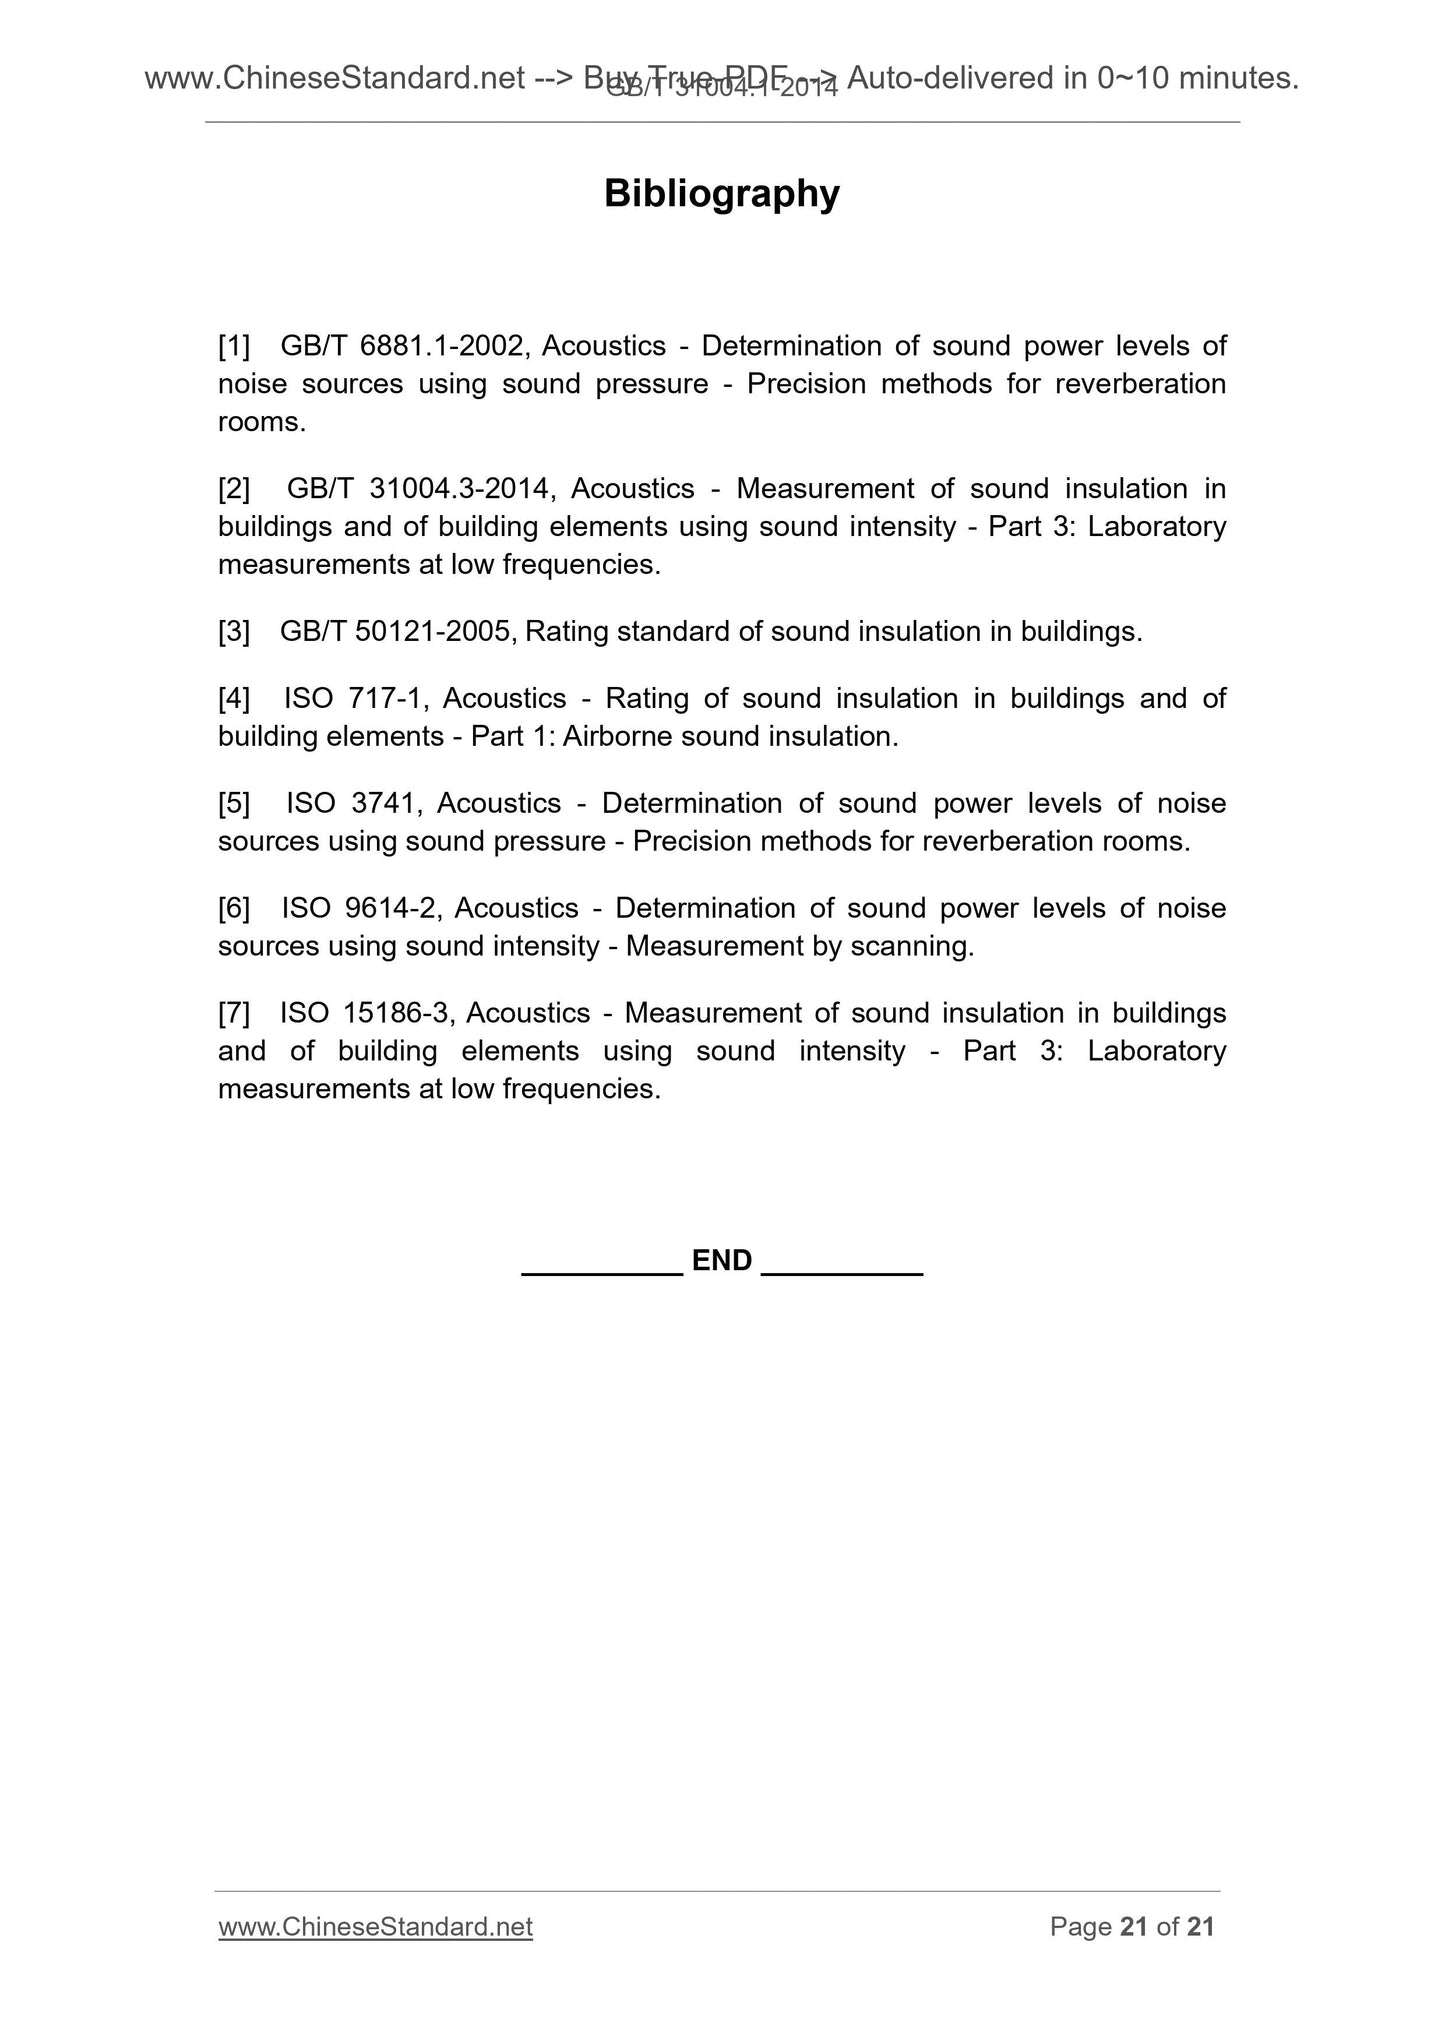 GB/T 31004.1-2014 Page 5